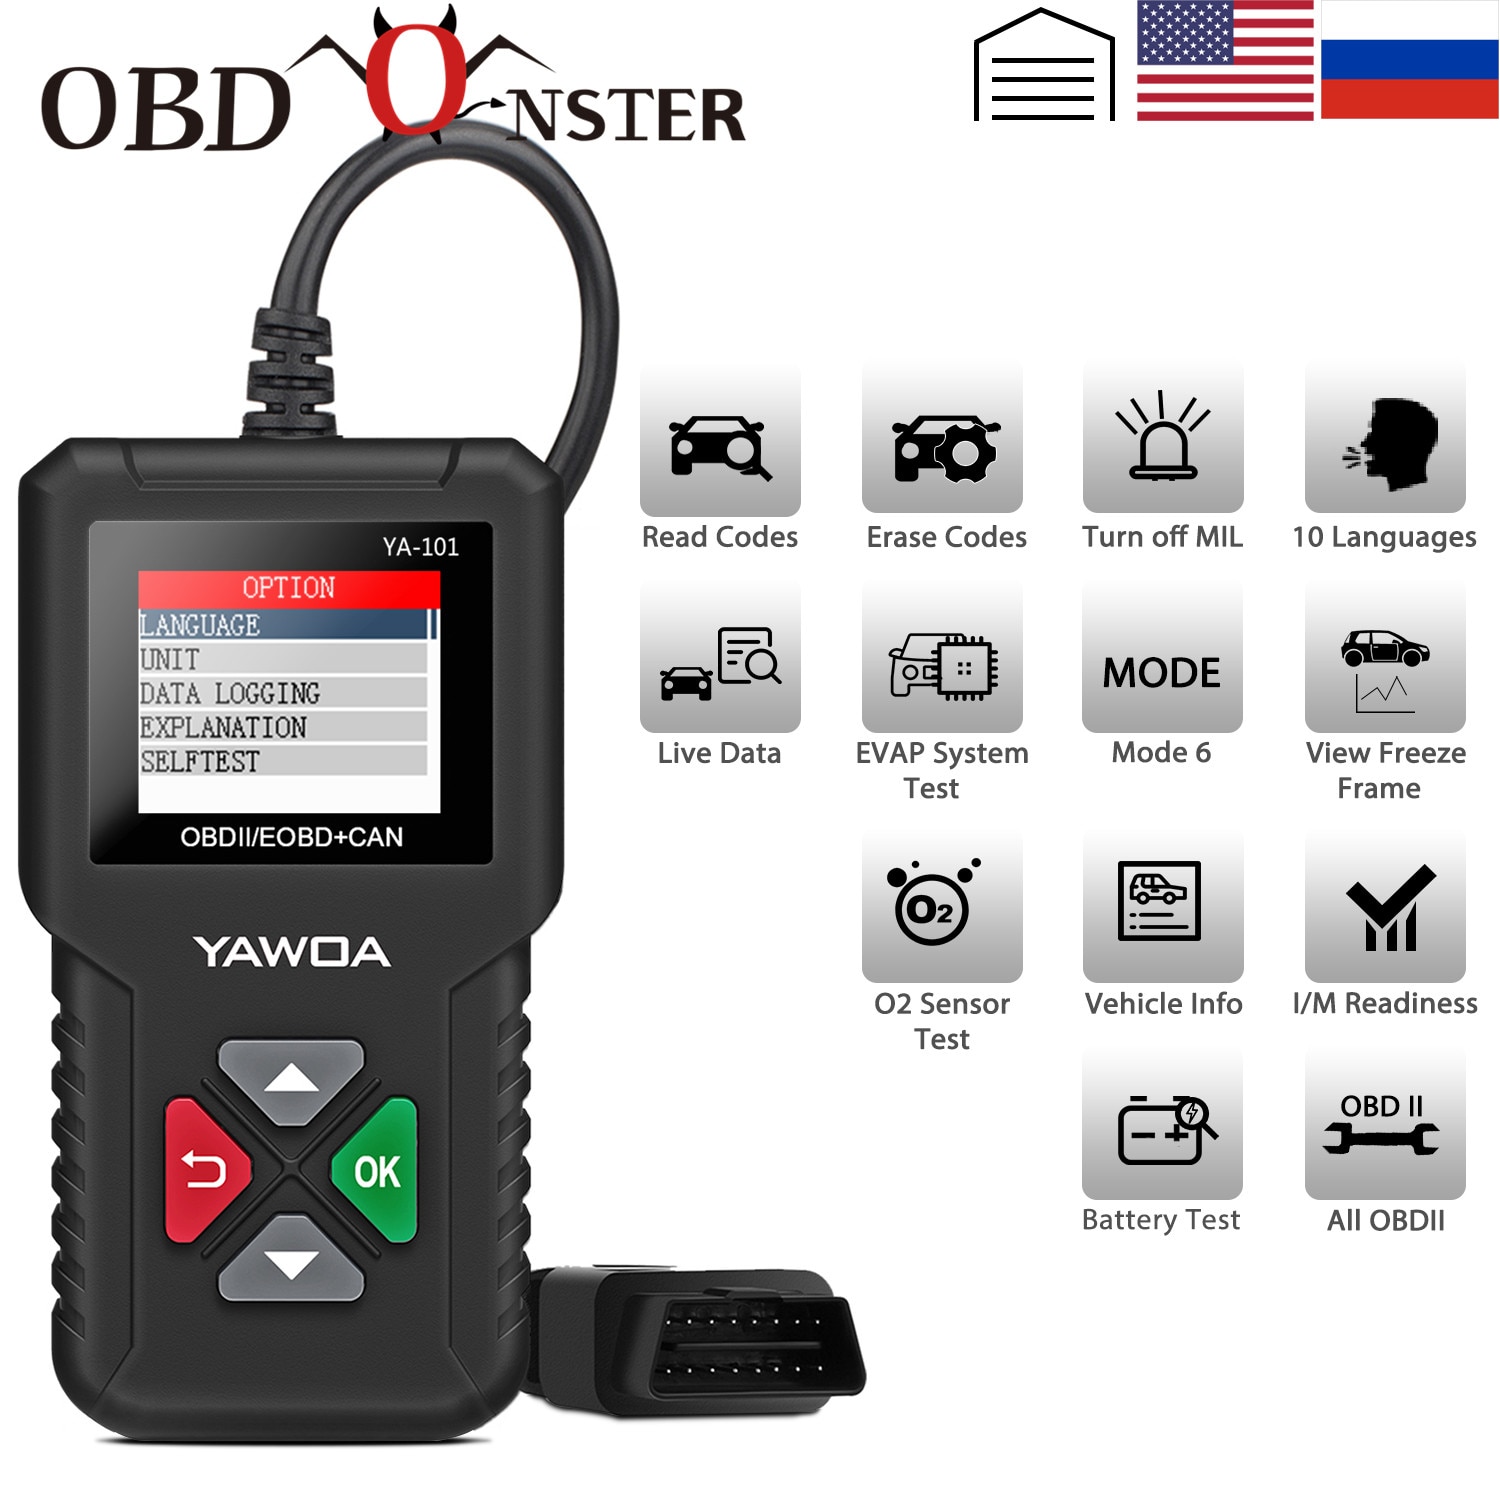 AUTOOL Universal OBD II Scanner Car Engine Fault Code Reader OBD2 CAN Diagnostic Scan Tool and Erasing Codes Check Emission Monitor Status Scan Tool 